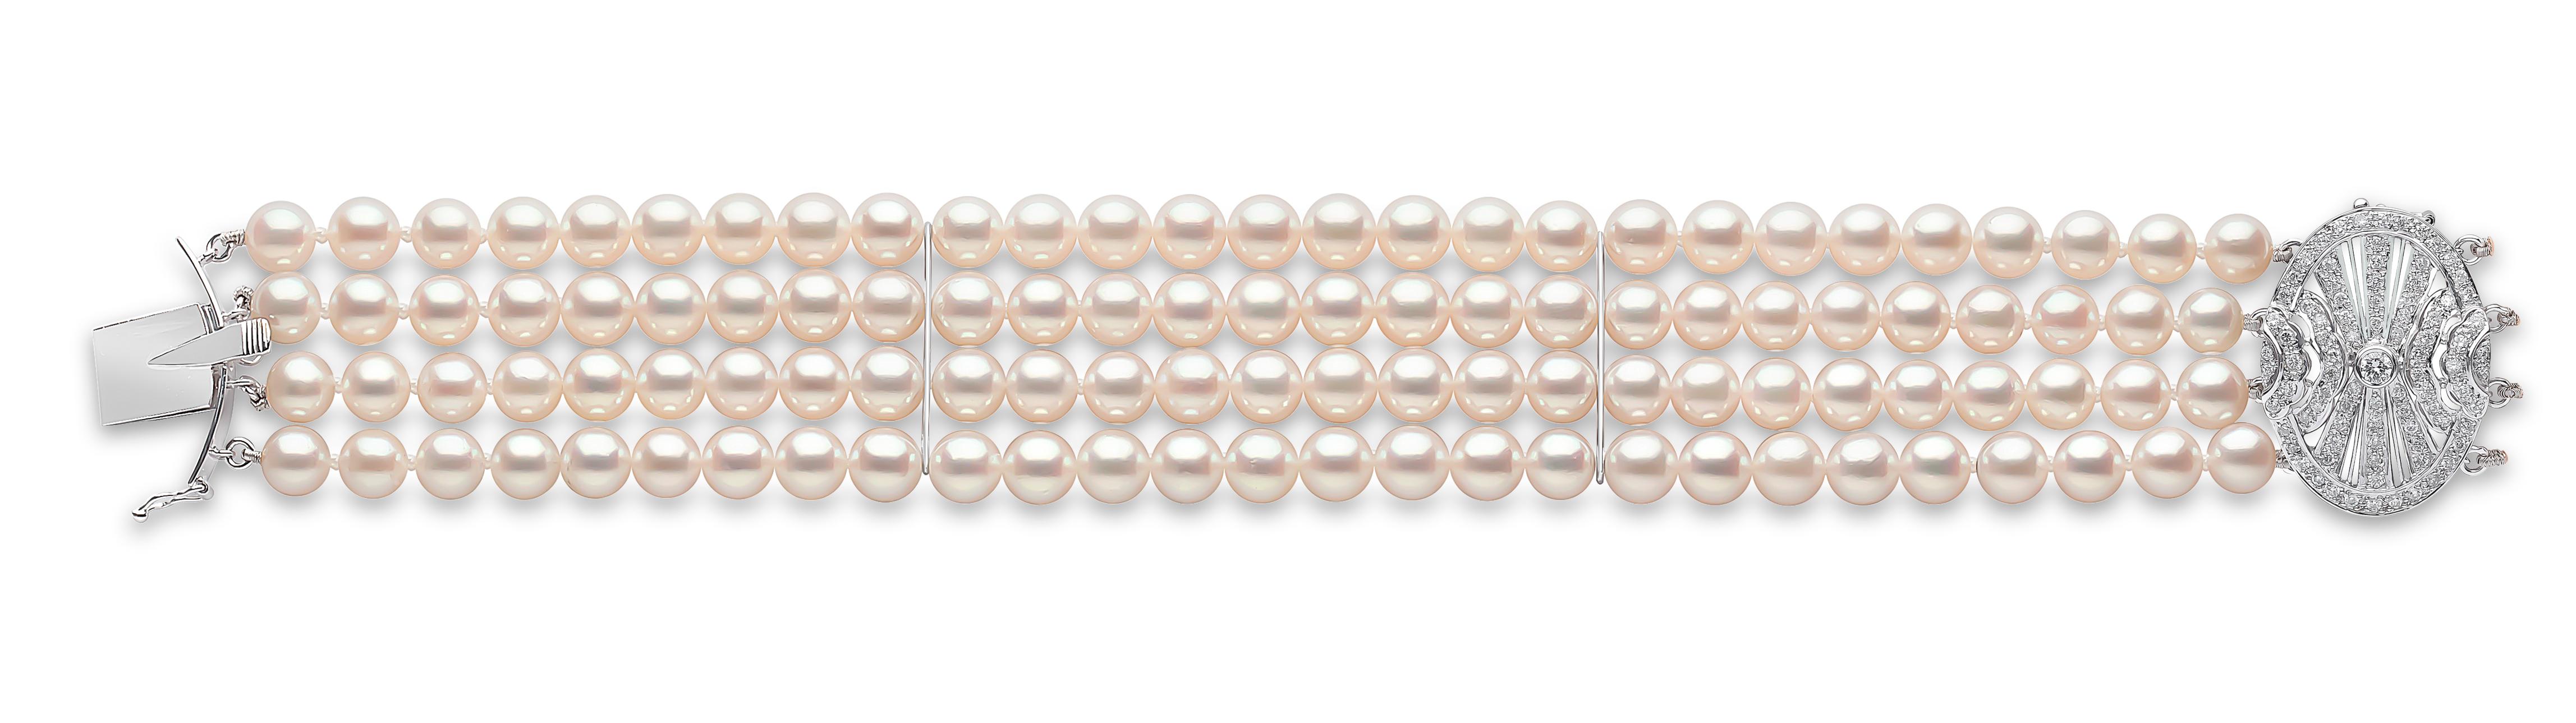  This elegant bracelet by Yoko London features four rows of perfectly matched Akoya pearls, completed by an ornate diamond clasp. Beguiling and sophisticated, this bracelet will add an unrivalled touch of elegance to any outfit.  
- 6-6.5mm Akoya